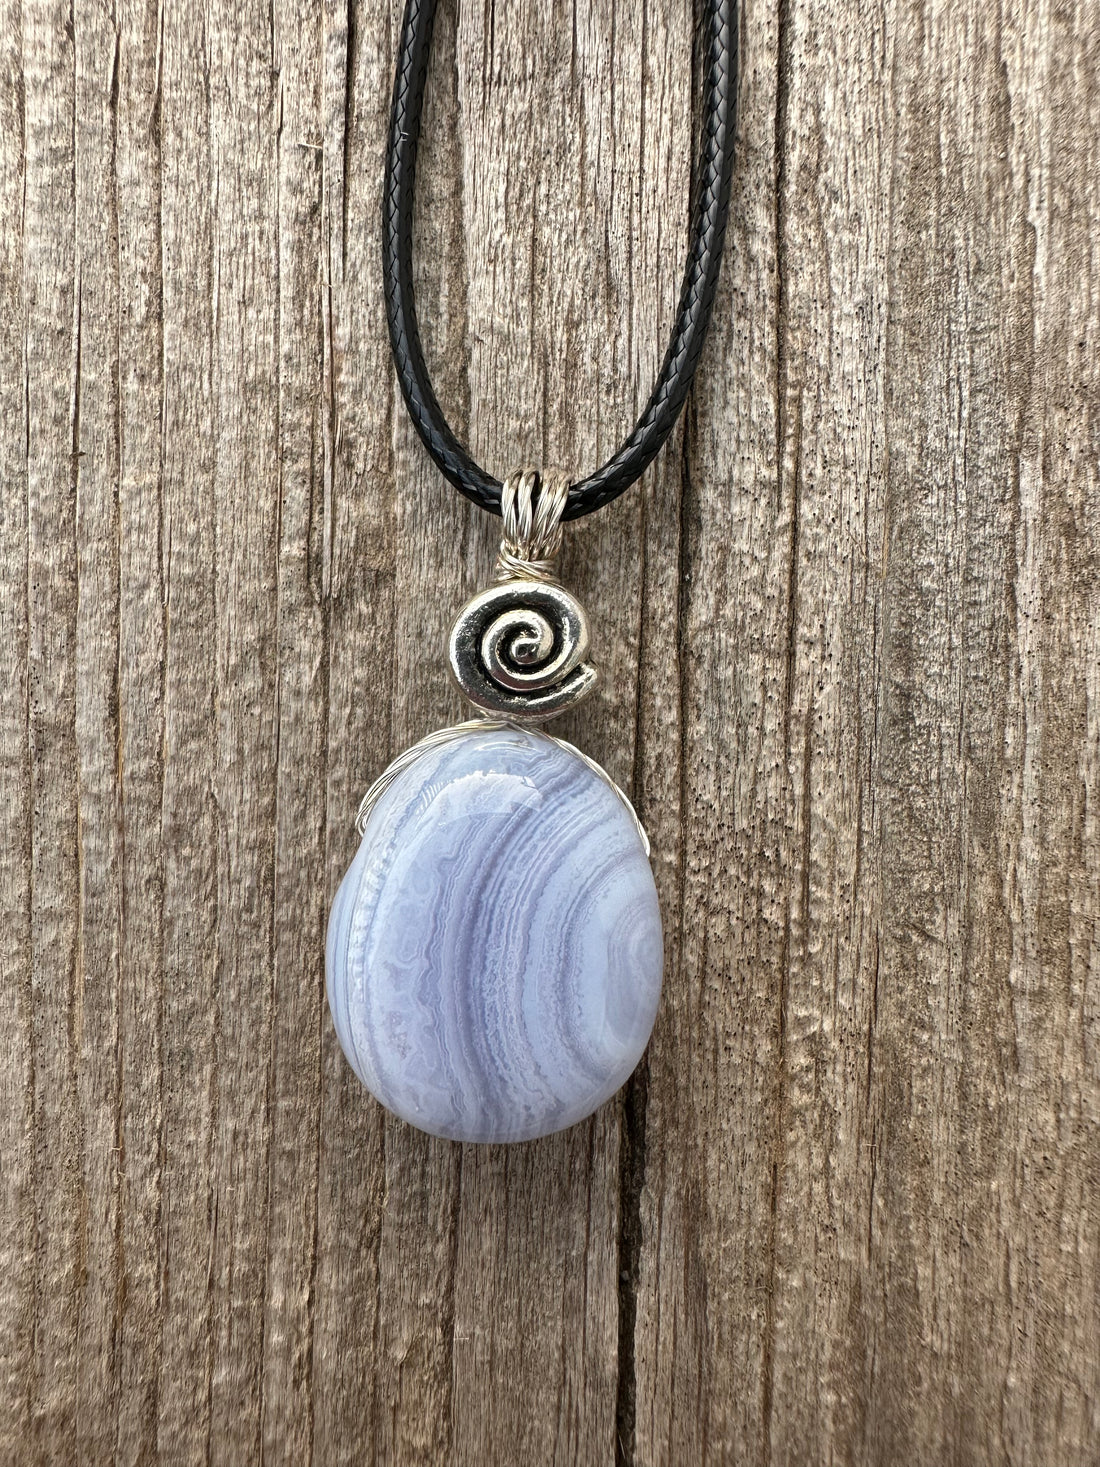 Blue Lace Agate Necklace for Serenity and Breaking Unhealthy Patterns. Swirl for Higher Consciousness.